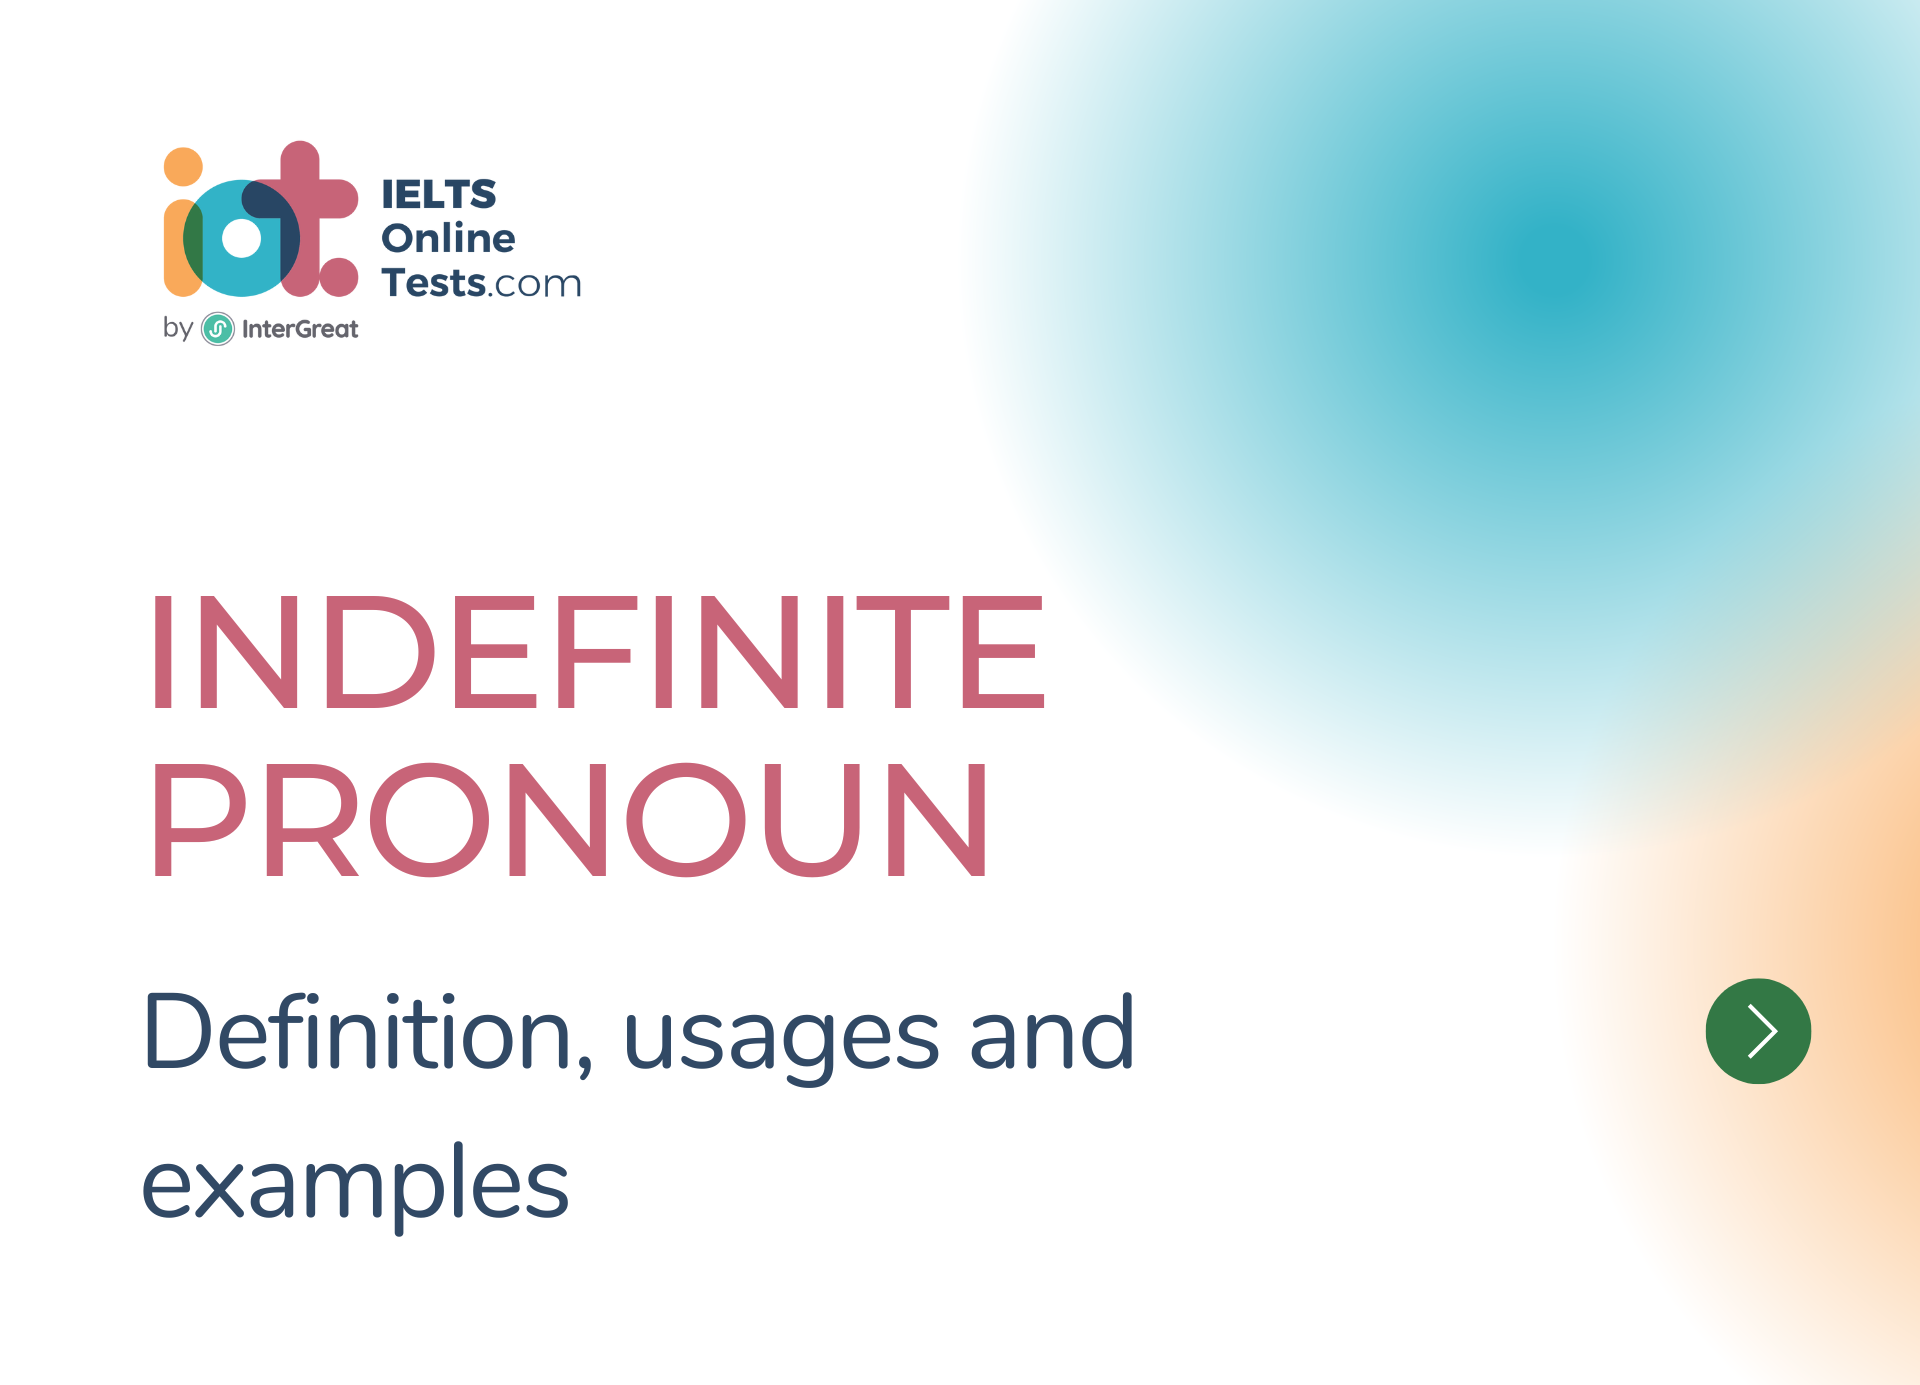 Indefinite pronoun definition, types and examples